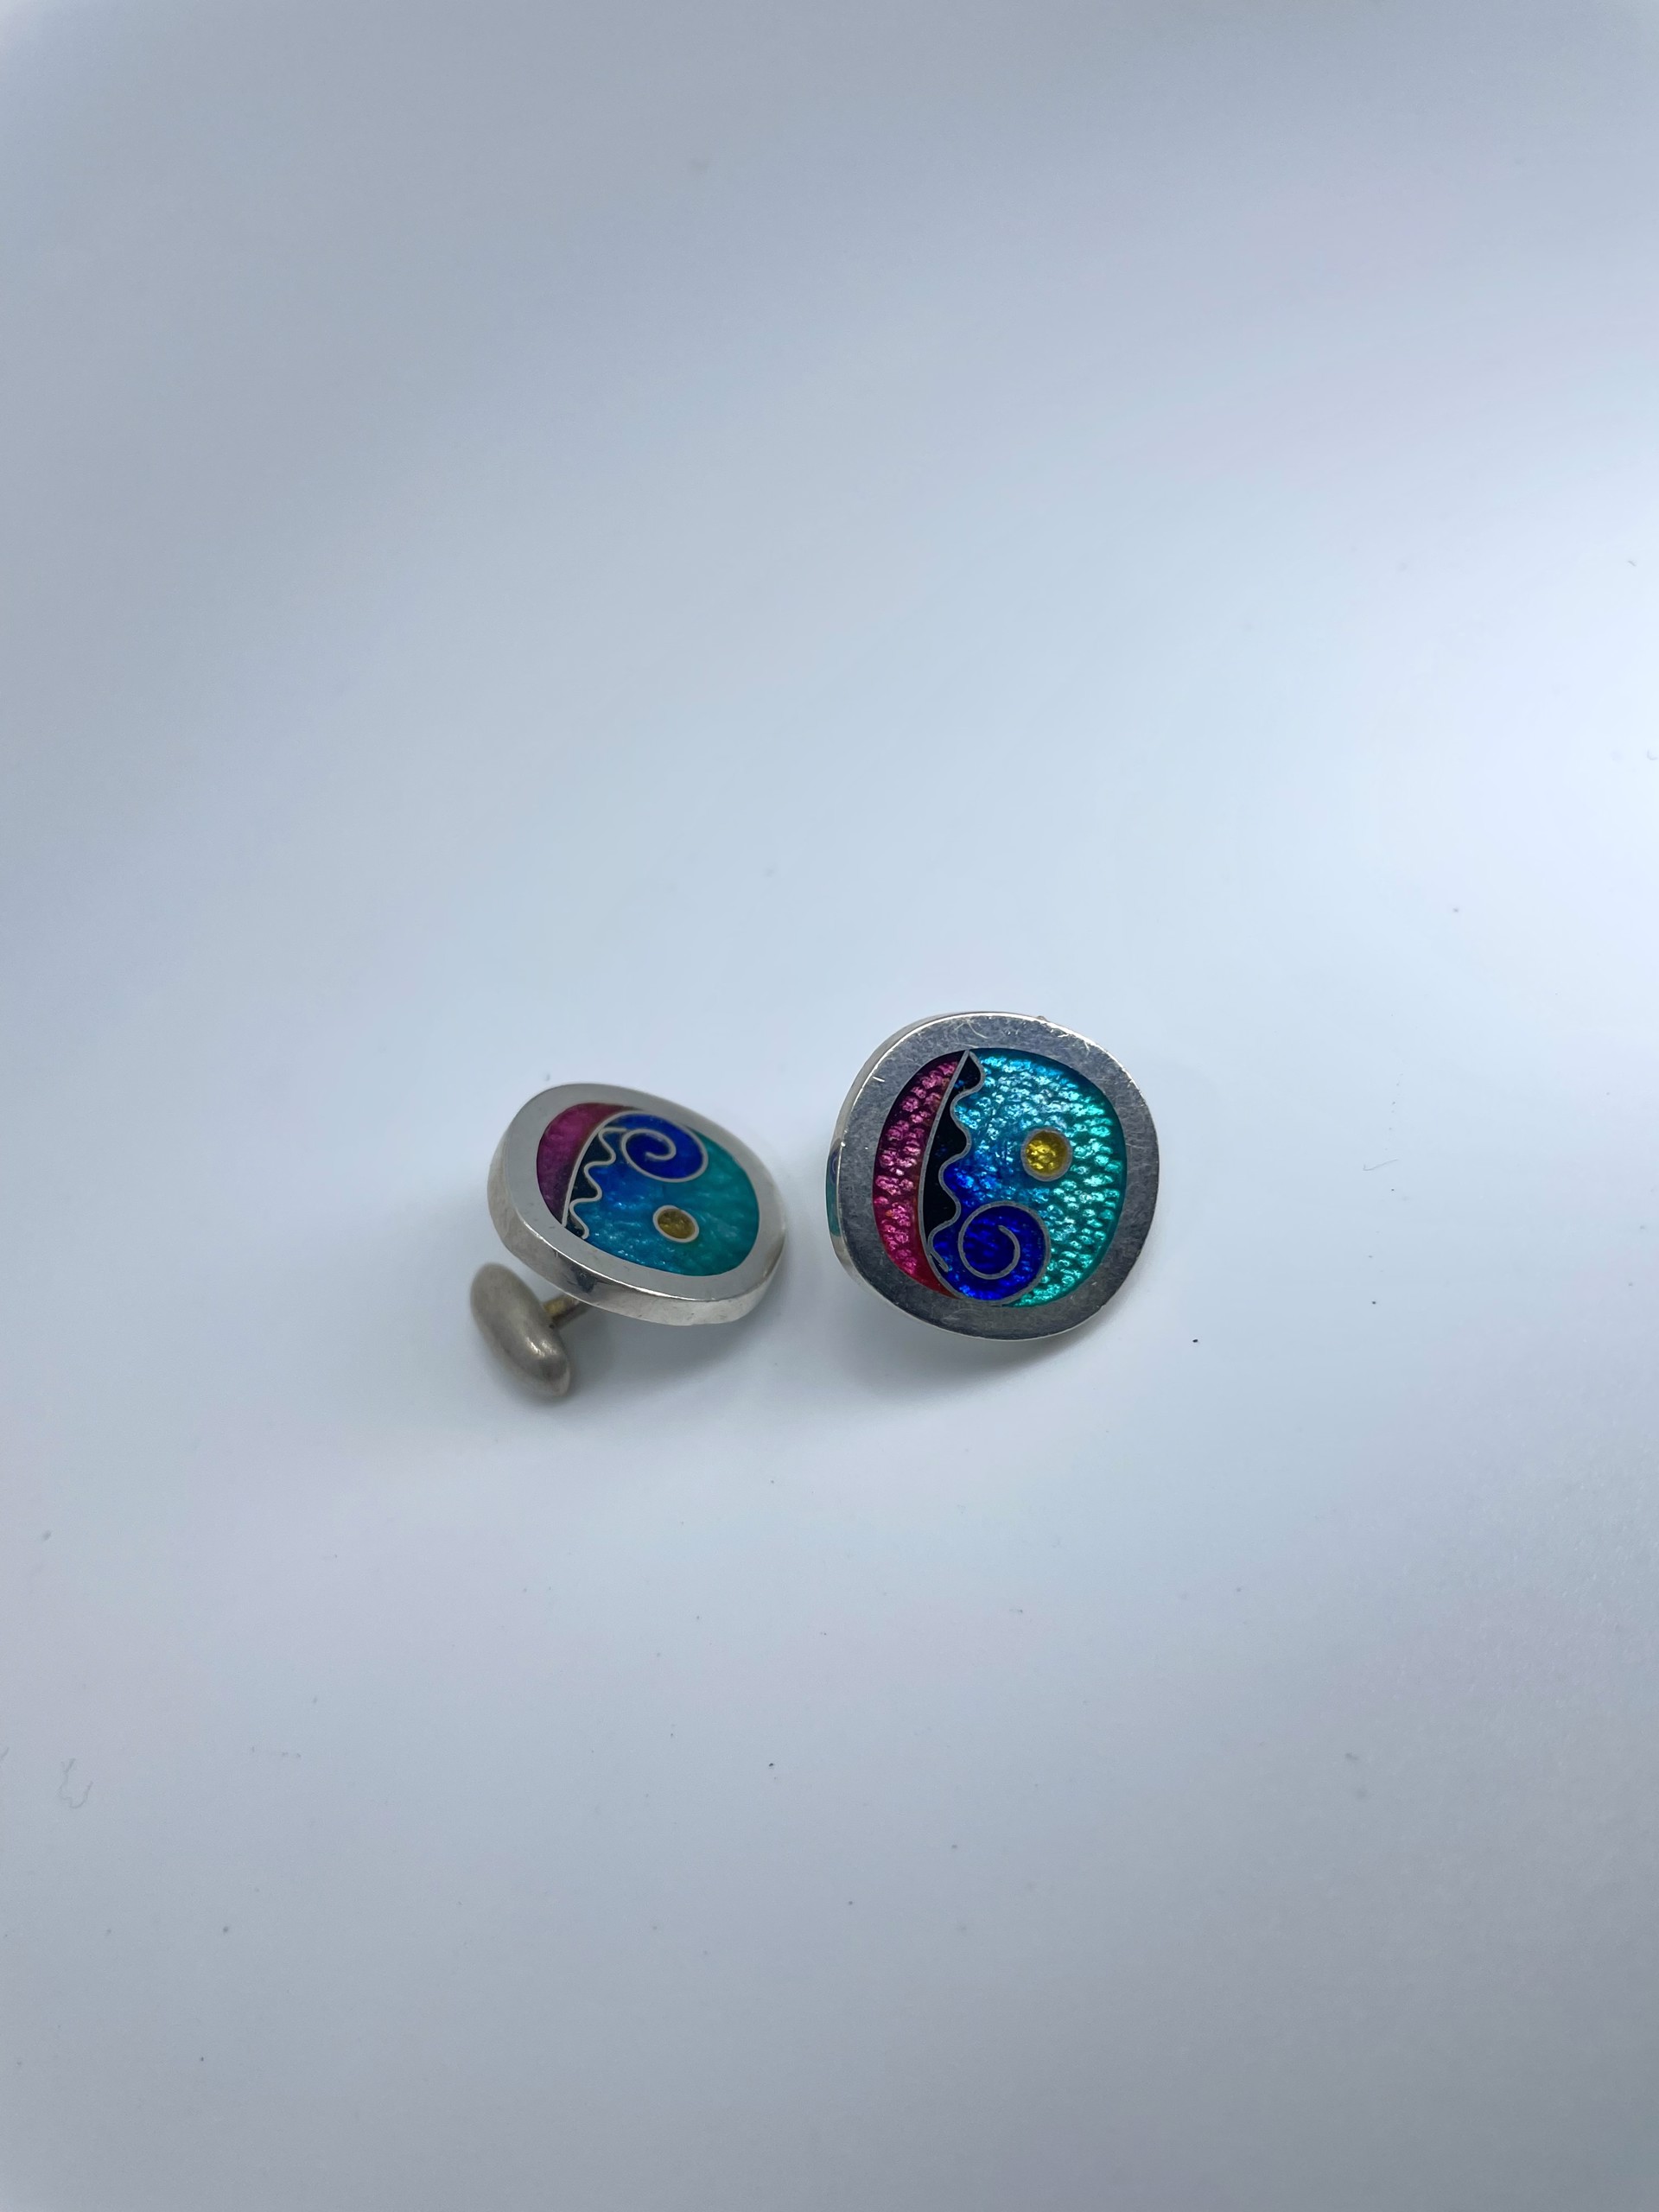 0934 Blue, Pink, and, Teal Cufflinks by Lanni